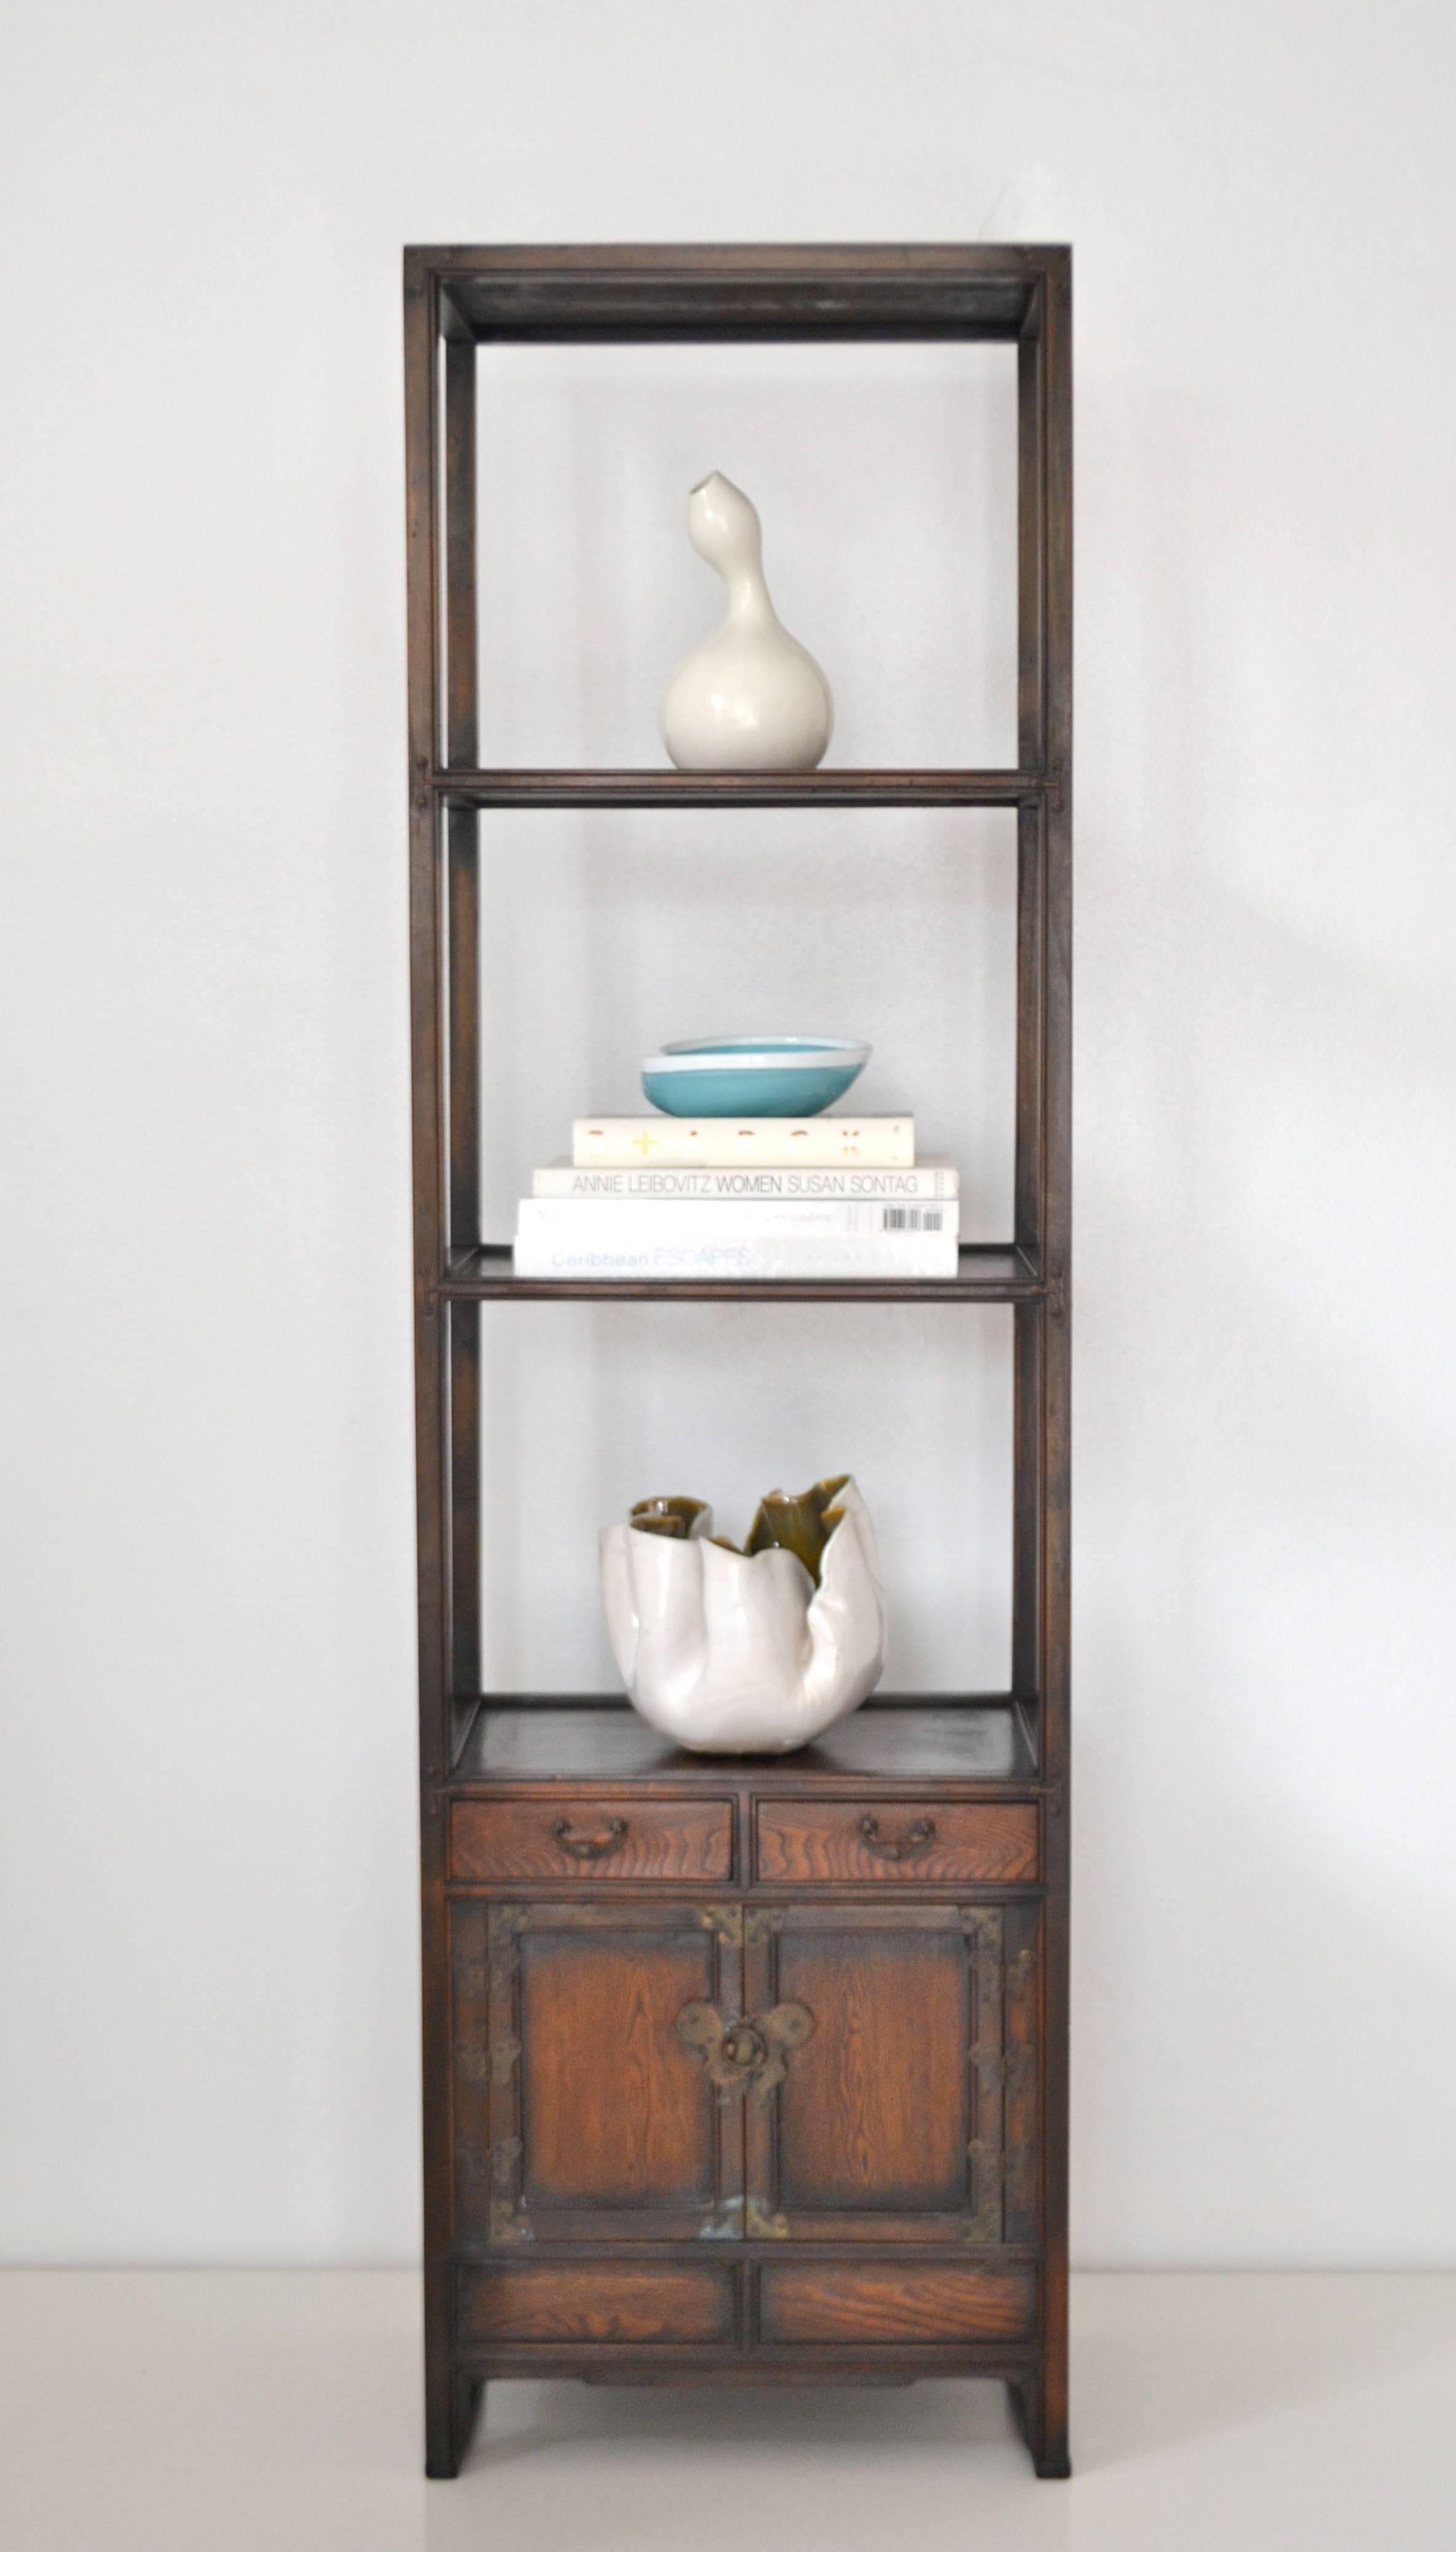 Stunning Asian elm bookcase, circa 1940s-1950s. This striking carved wood etagere is artisan crafted with three tiers of open shelves over two drawers and a double door cabinet accented with patinated bronze hardware.